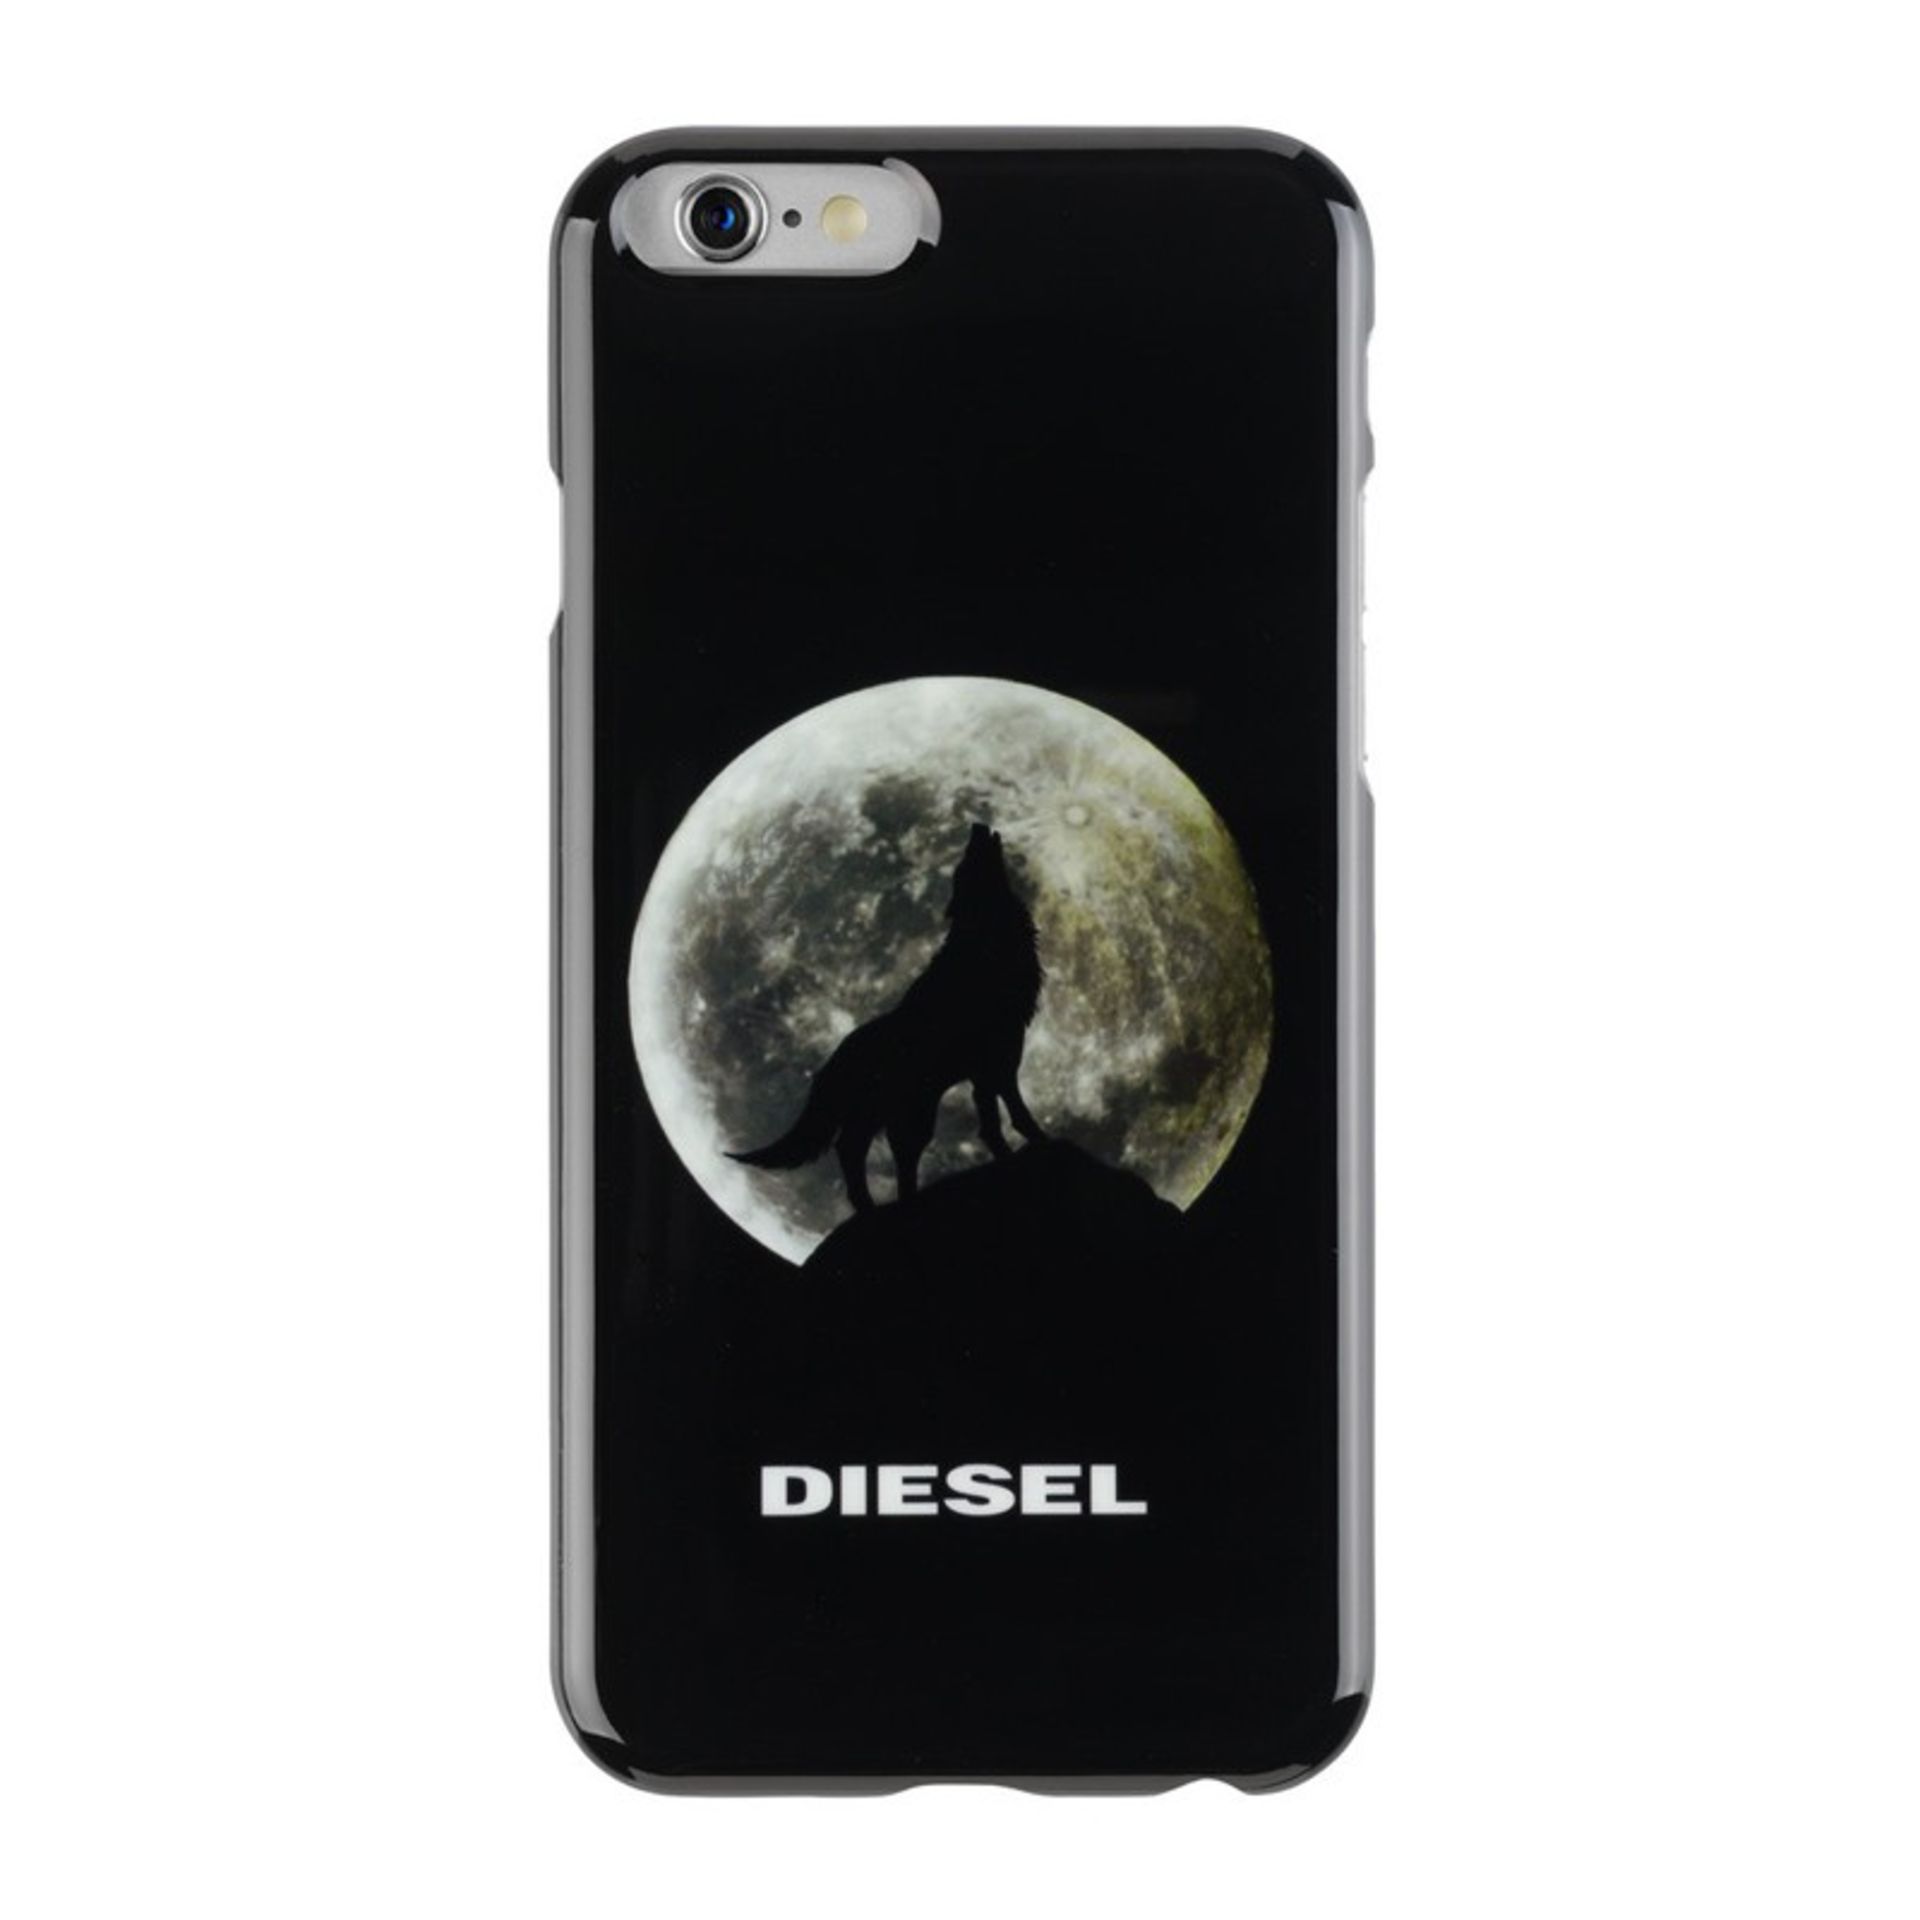 V *TRADE QTY* Brand New Diesel Pluton 6 Hard Snap Case For iPhone 6 ISP Price 19.90 Euros X 3 YOUR